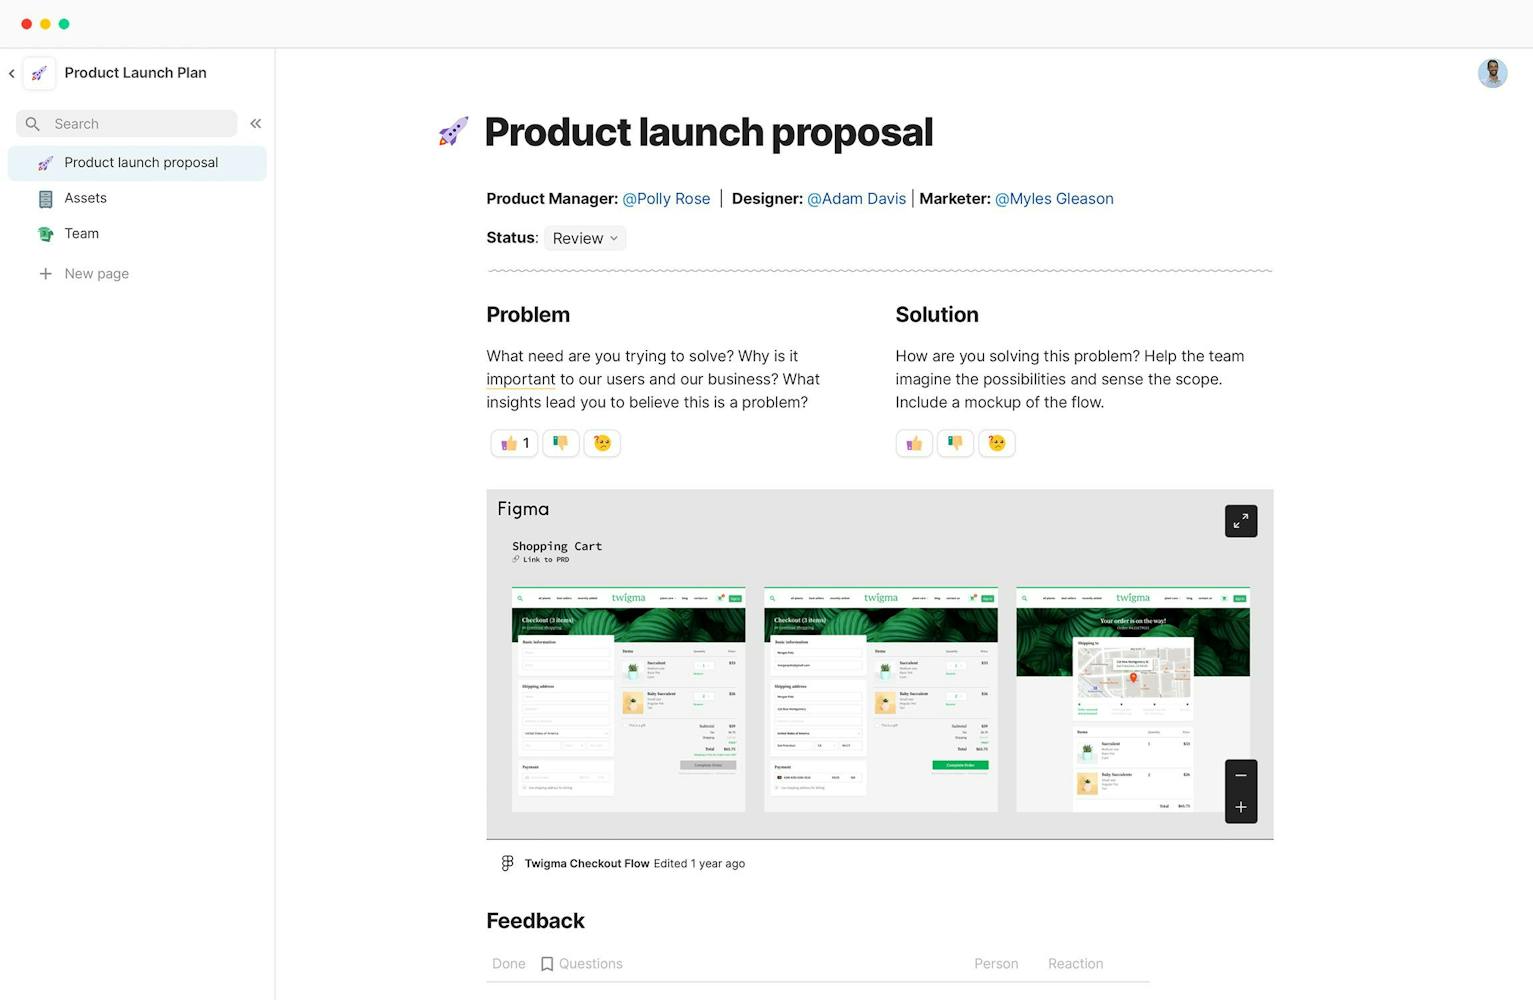 A product launch proposal in Coda - problem statement, solution statement, and an embedded Figma design doc.